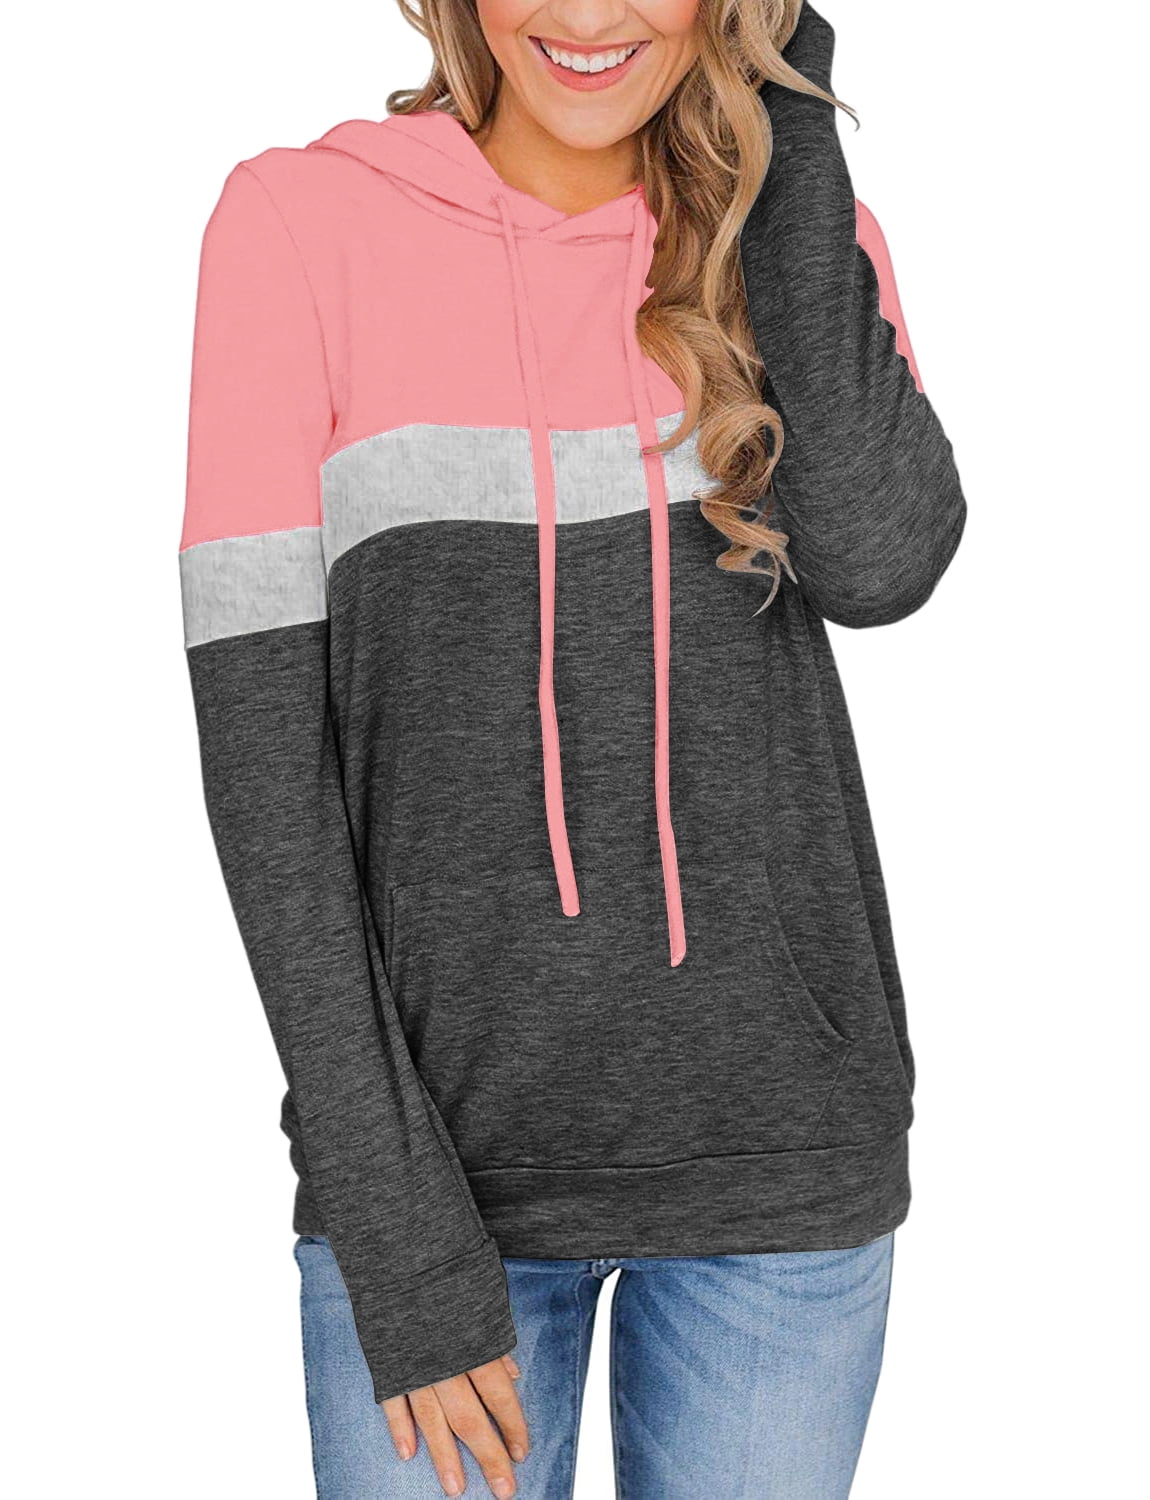 DESKABLY Same Day Delivery Items Prime Under 5 Women's Casual Long Sleeve  Hoodies Sweatshirts Drawstring Pullover Tunic Tops at  Women's  Clothing store